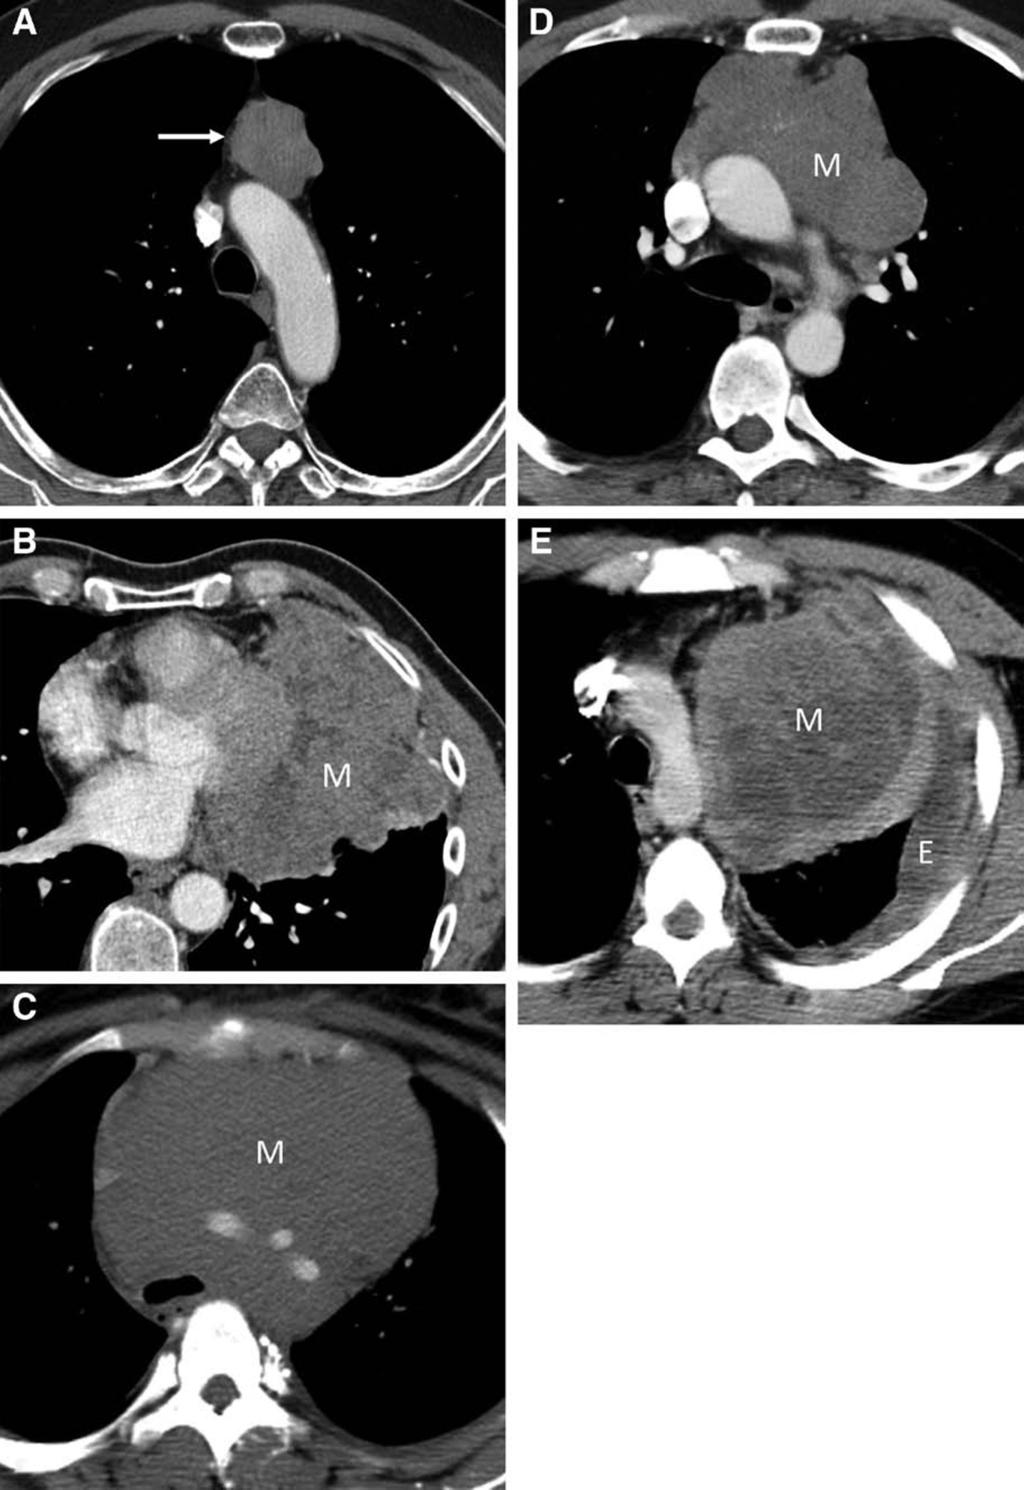 Carter et al. Journal of Thoracic Oncology Volume 9, Number 9, Supplement 2, September 2014 FIGURE 5. Lesions identifiable on imaging with clinical context.